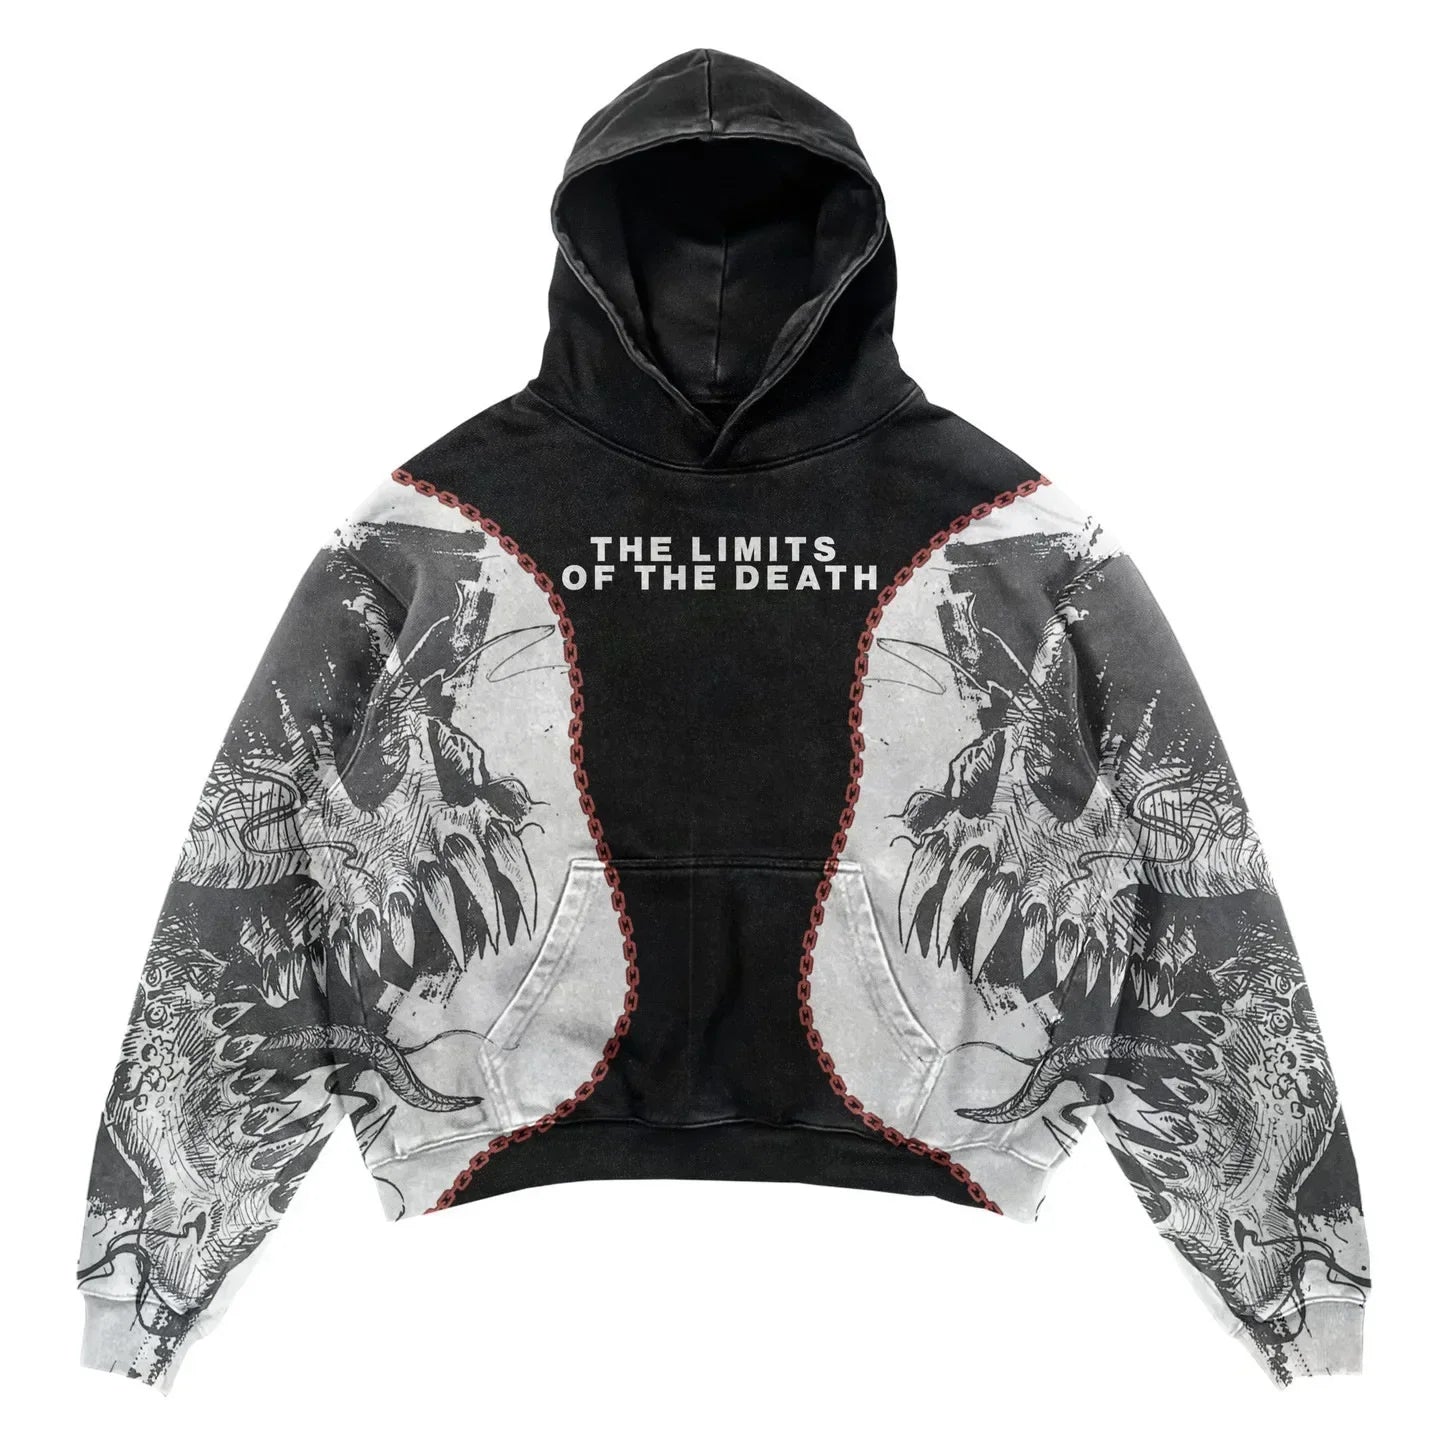 A black polyester hoodie with a graphic of dragon-like creatures and the text "The Limits of the Death" printed across the chest. The sleeves, following a punk style, feature intricate designs that extend from the body graphic. The Explosions Printed Skull Y2K Retro Hooded Sweater Coat Street Style Gothic Casual Fashion Hooded Sweater Men's Female by Maramalive™ encapsulates this unique design and aesthetic perfectly.